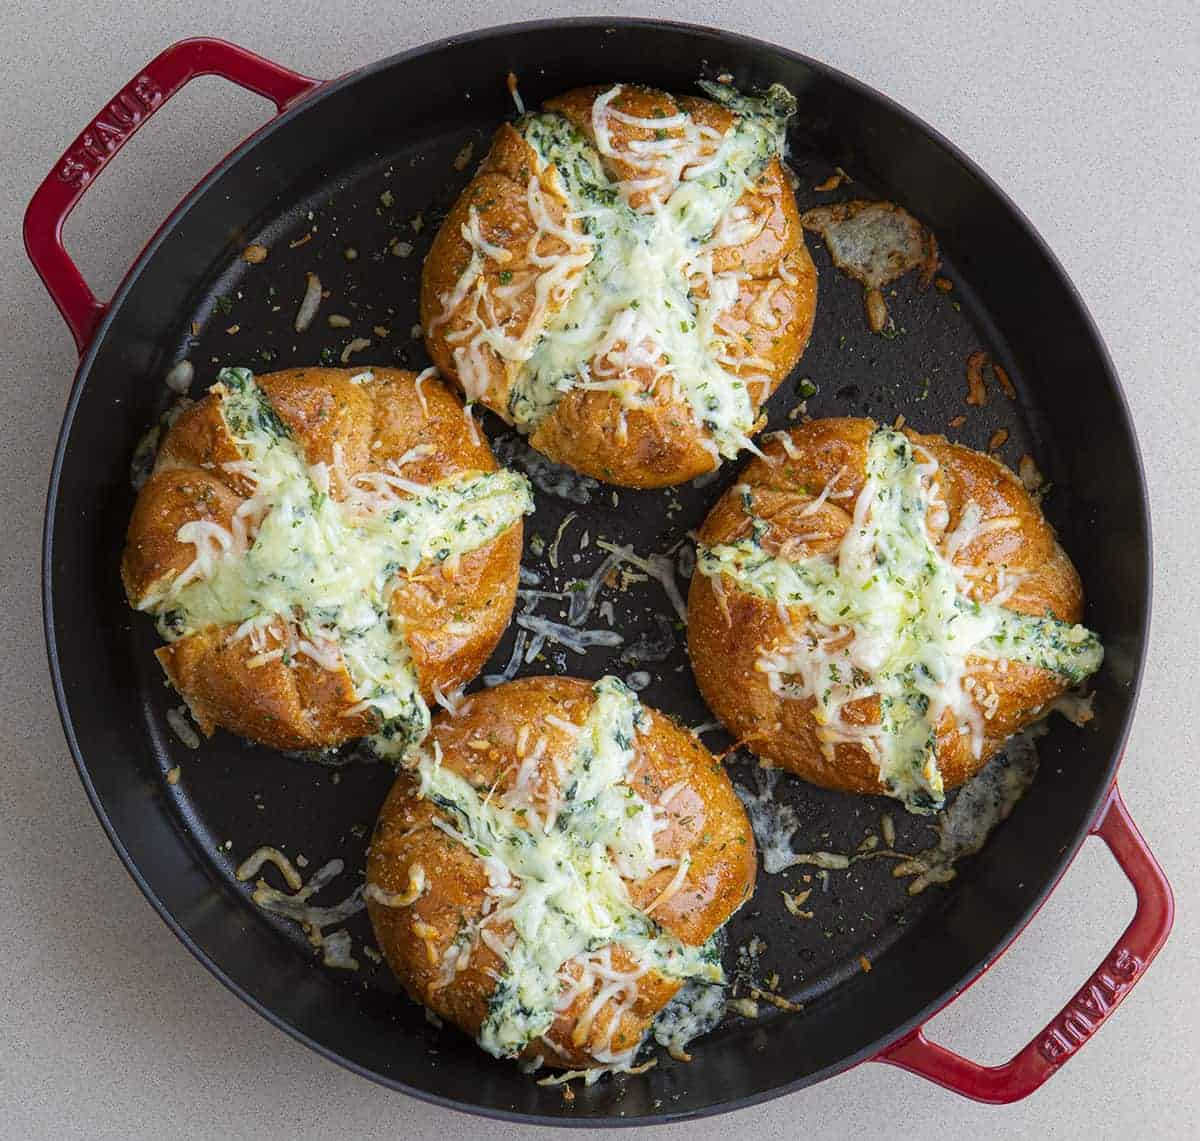 Overhead view of Spinach Artichoke Pull Apart Bread in Red Skillet